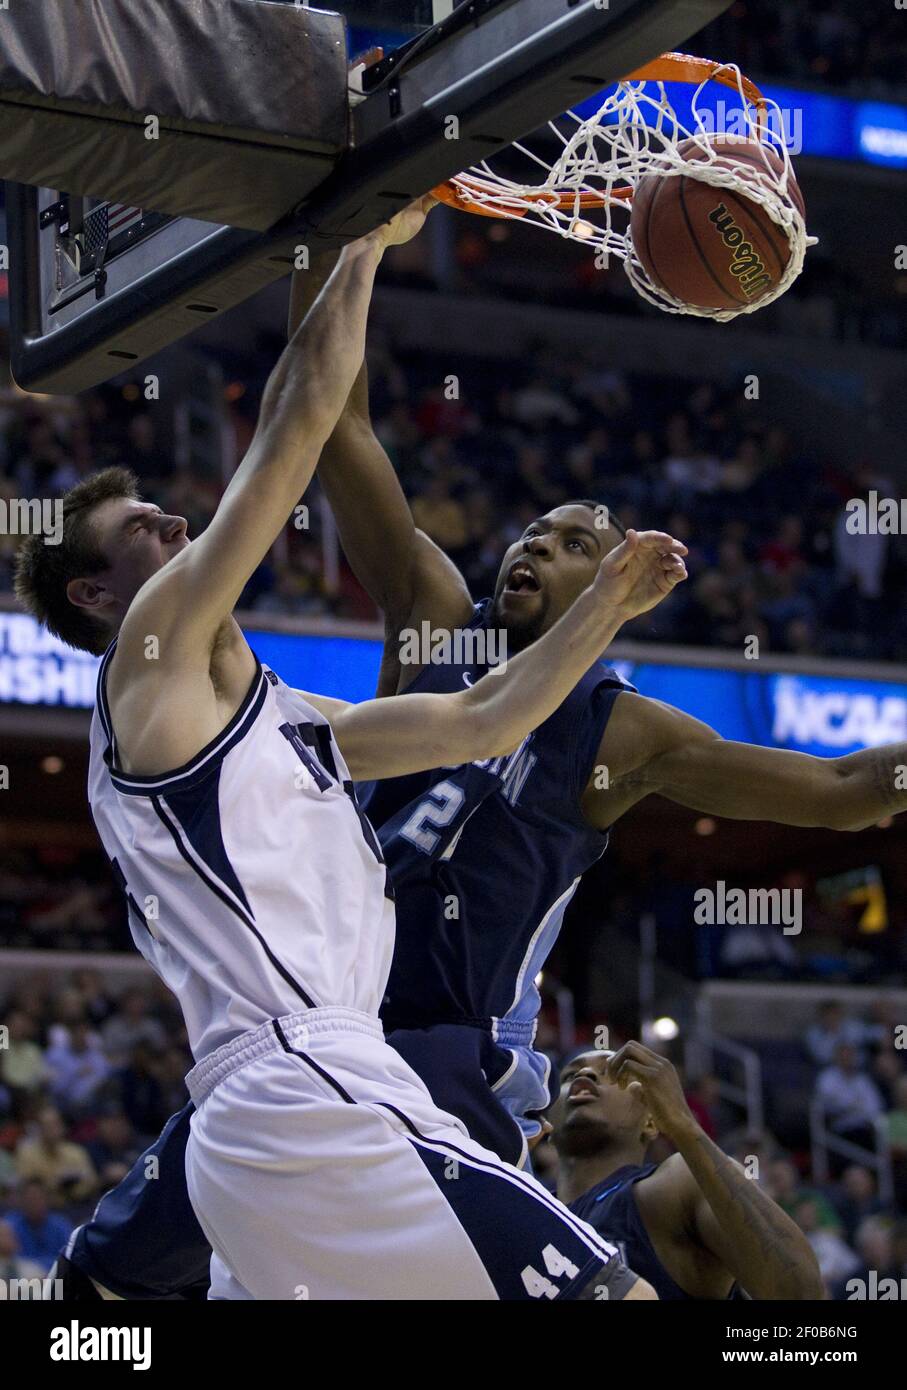 Butler vs. Old Dominion: 2011 NCAA men's first round